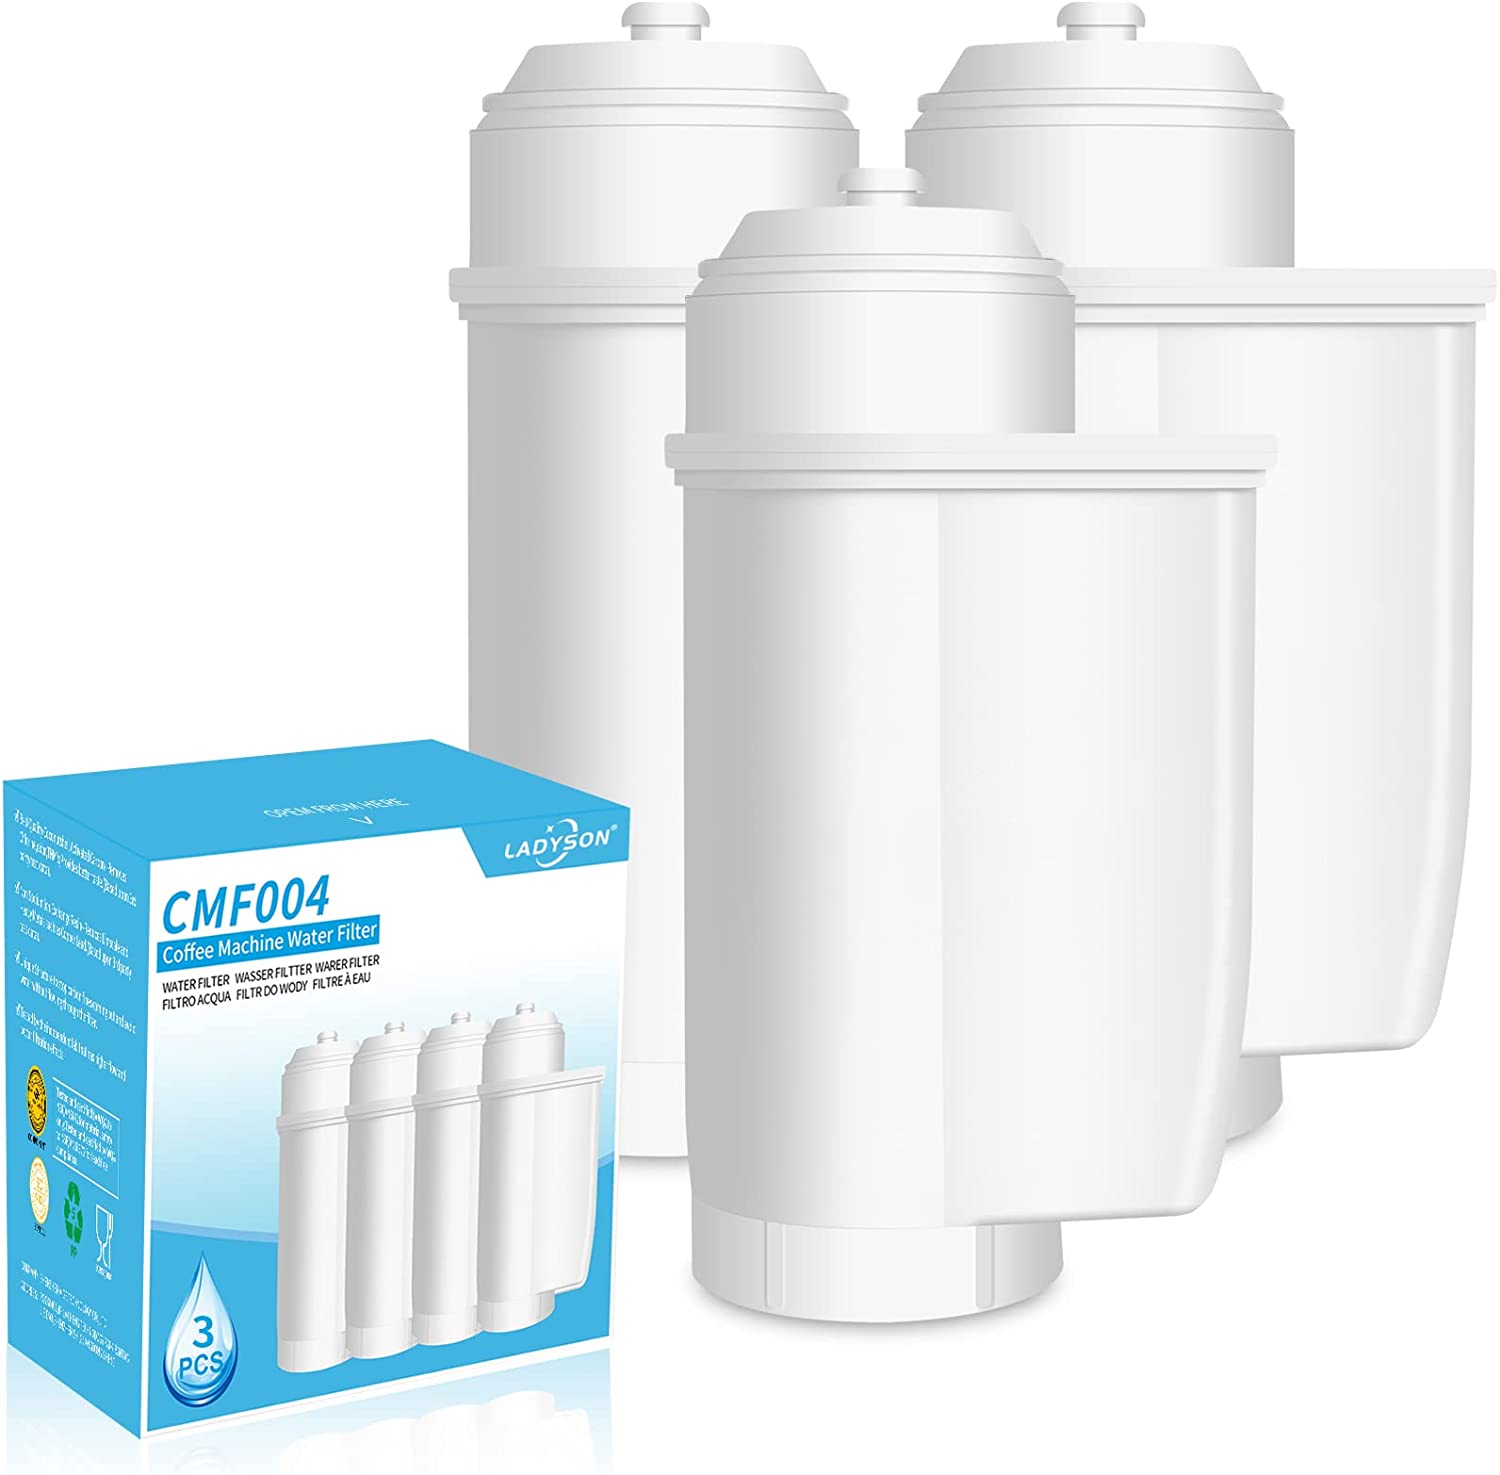 LADYSON Water Filter for Siemens EQ6 EQ7 EQ500 EQ Series Compatible with Brita Siemens Intenza TZ70003, Bosch TCZ7003 TCZ-7003 TCZ7033 Fully Automatic Coffee Machines Water Filter Cartridge (Pack of 3)